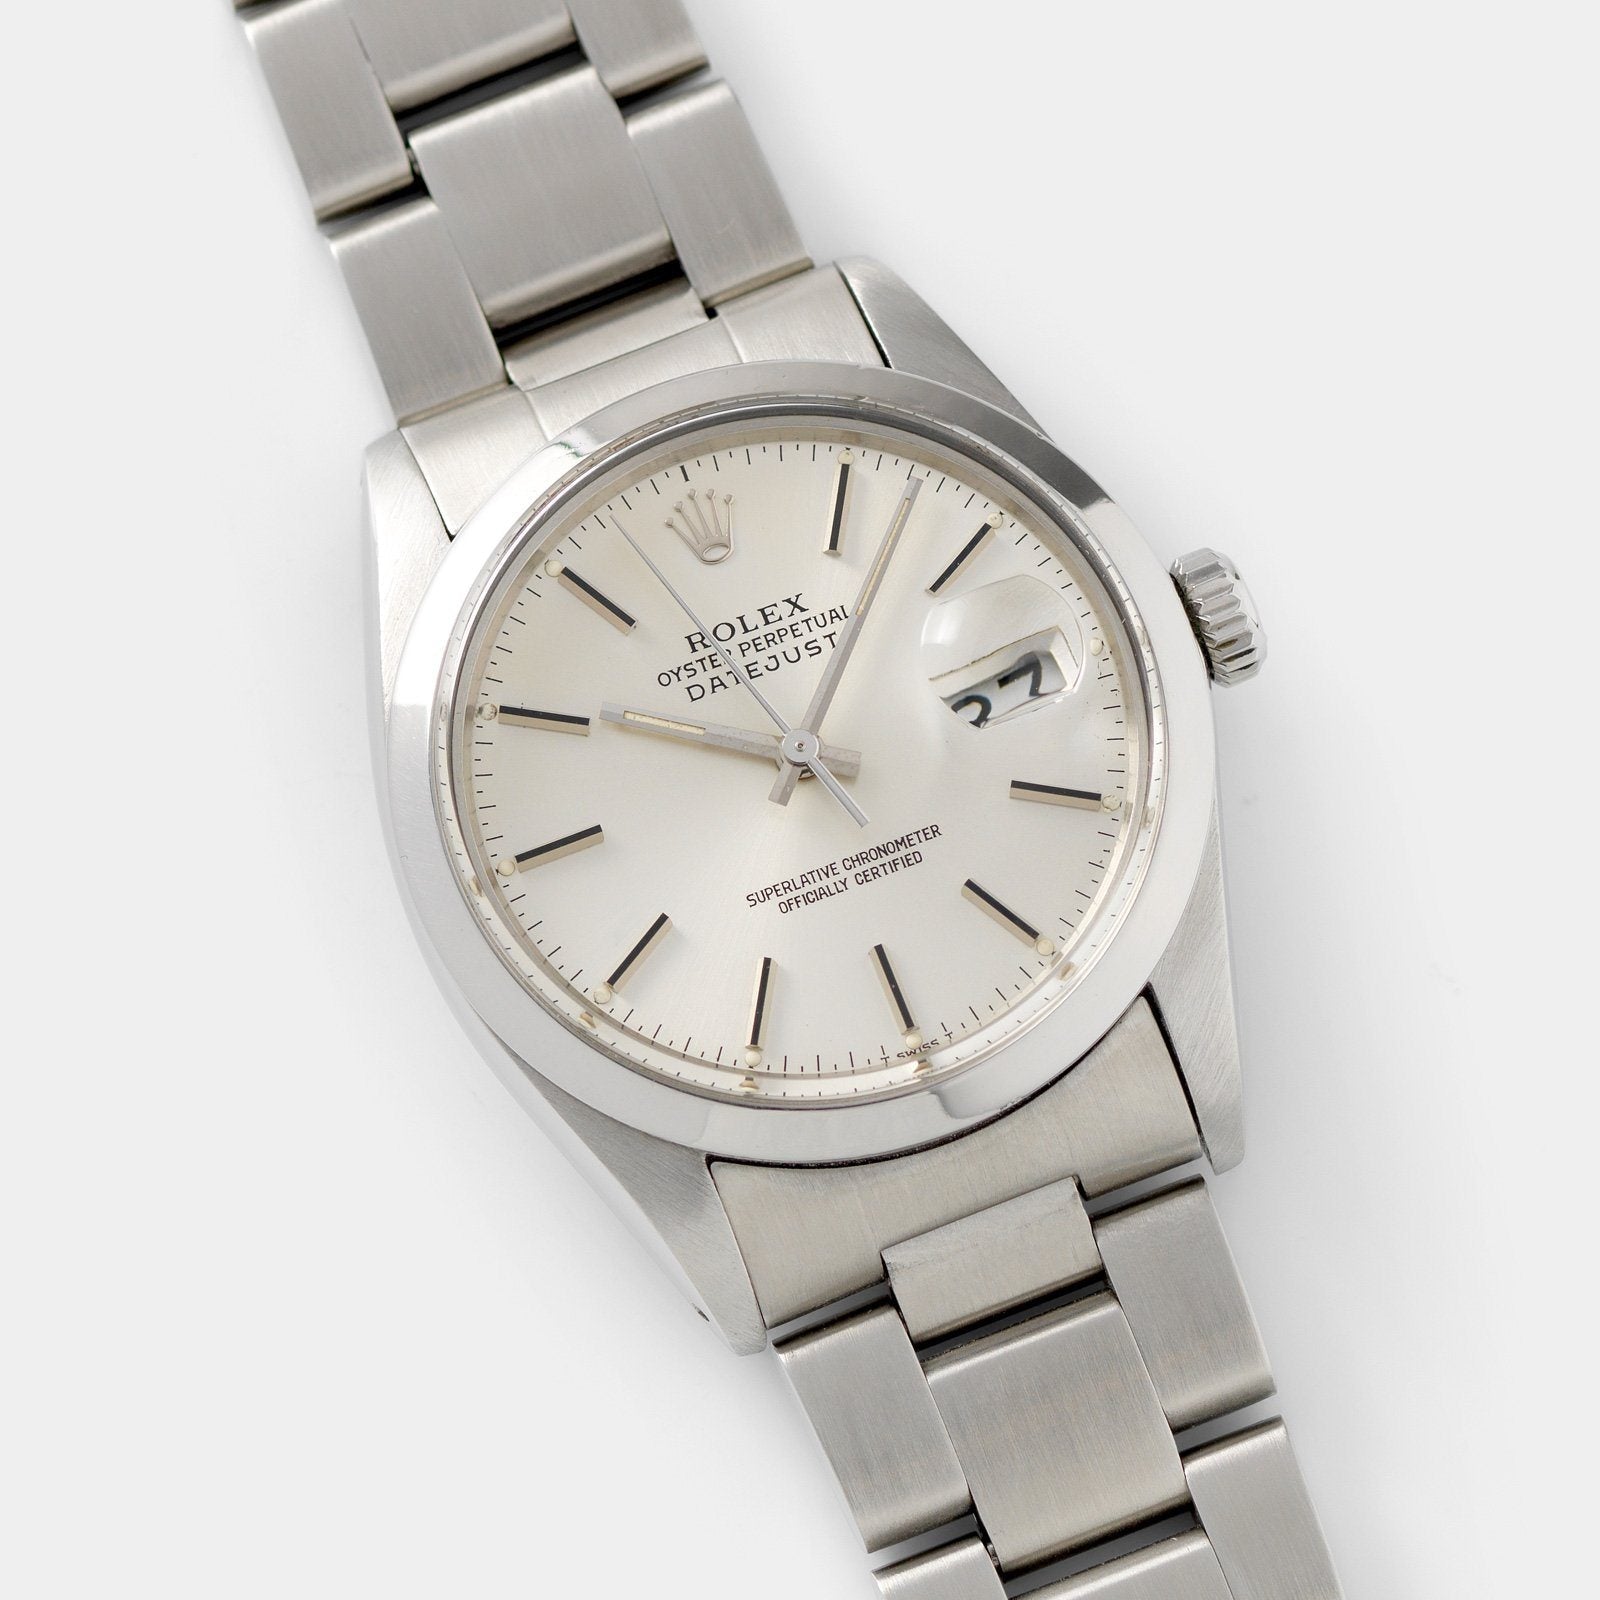 Rolex Datejust Reference 16000 Silver Soleil Dial with Smooth bezel